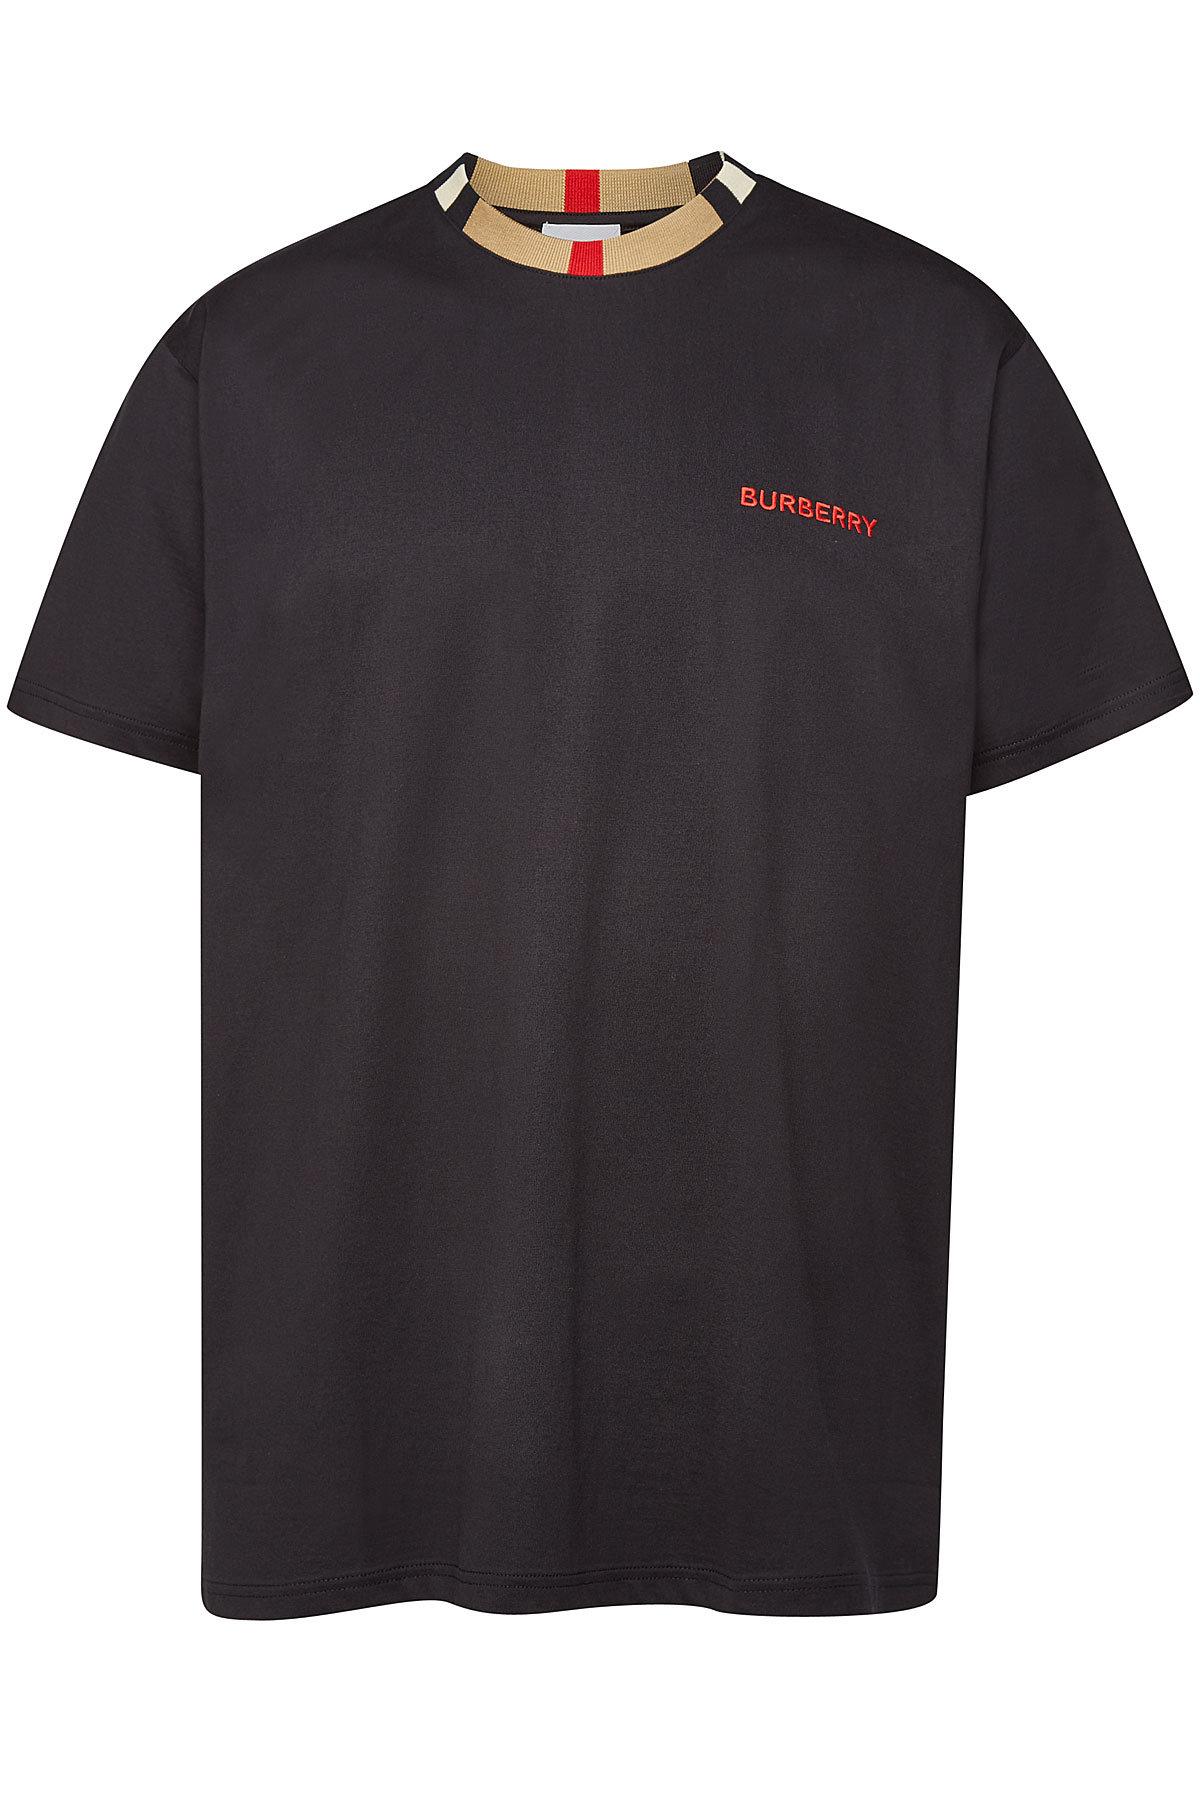 Burberry Jayson Embroidered Cotton T-shirt in Black for Men - Lyst